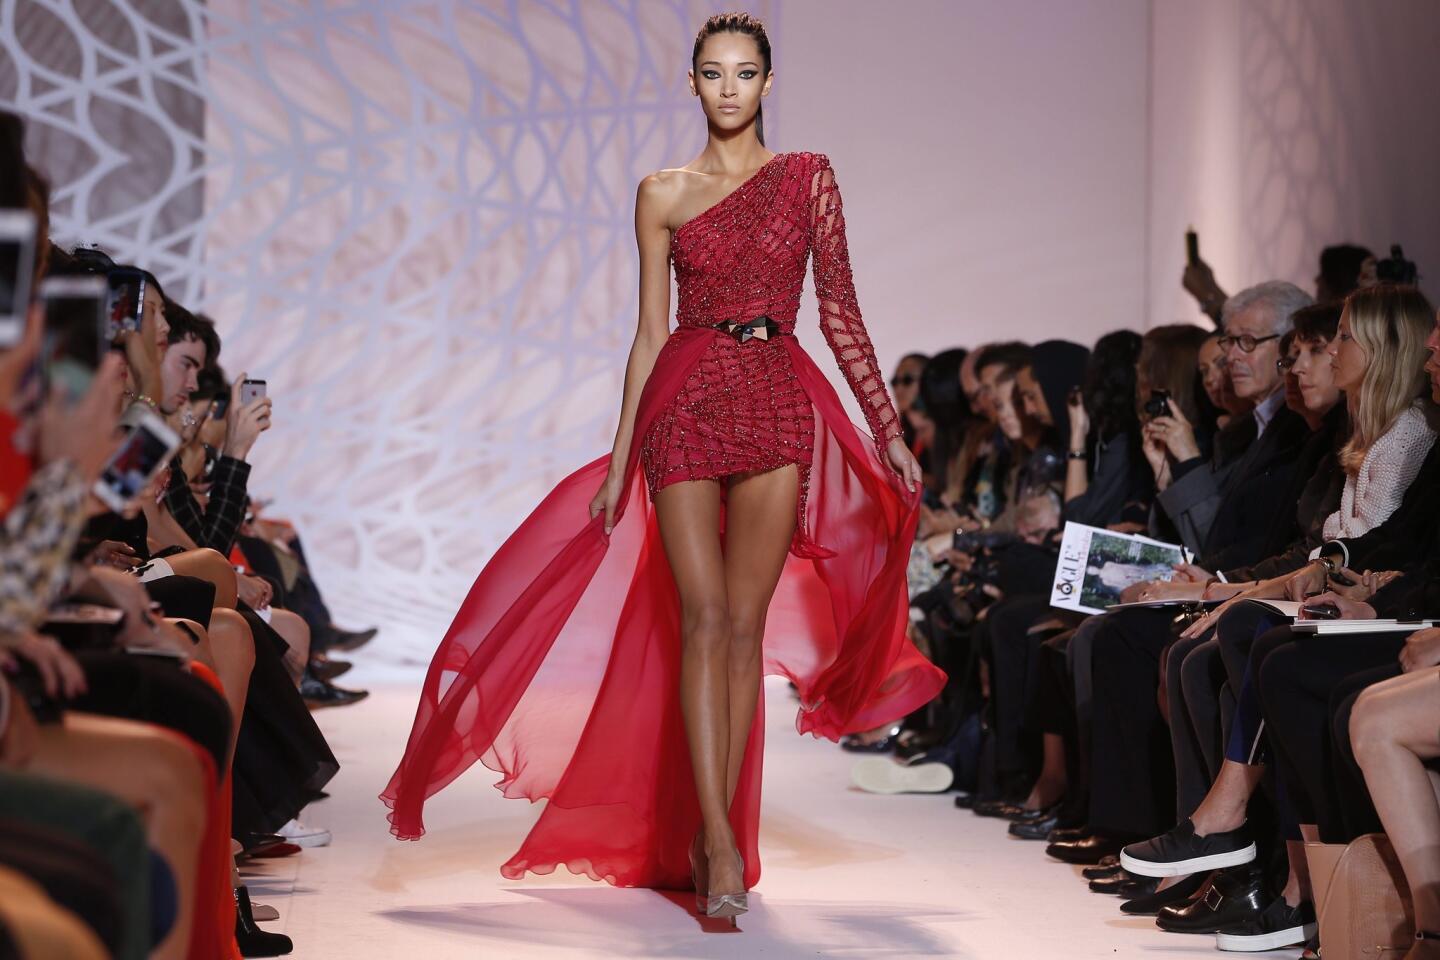 Paris Haute Couture 2014: Red-carpet-ready looks from Zuhair Murad